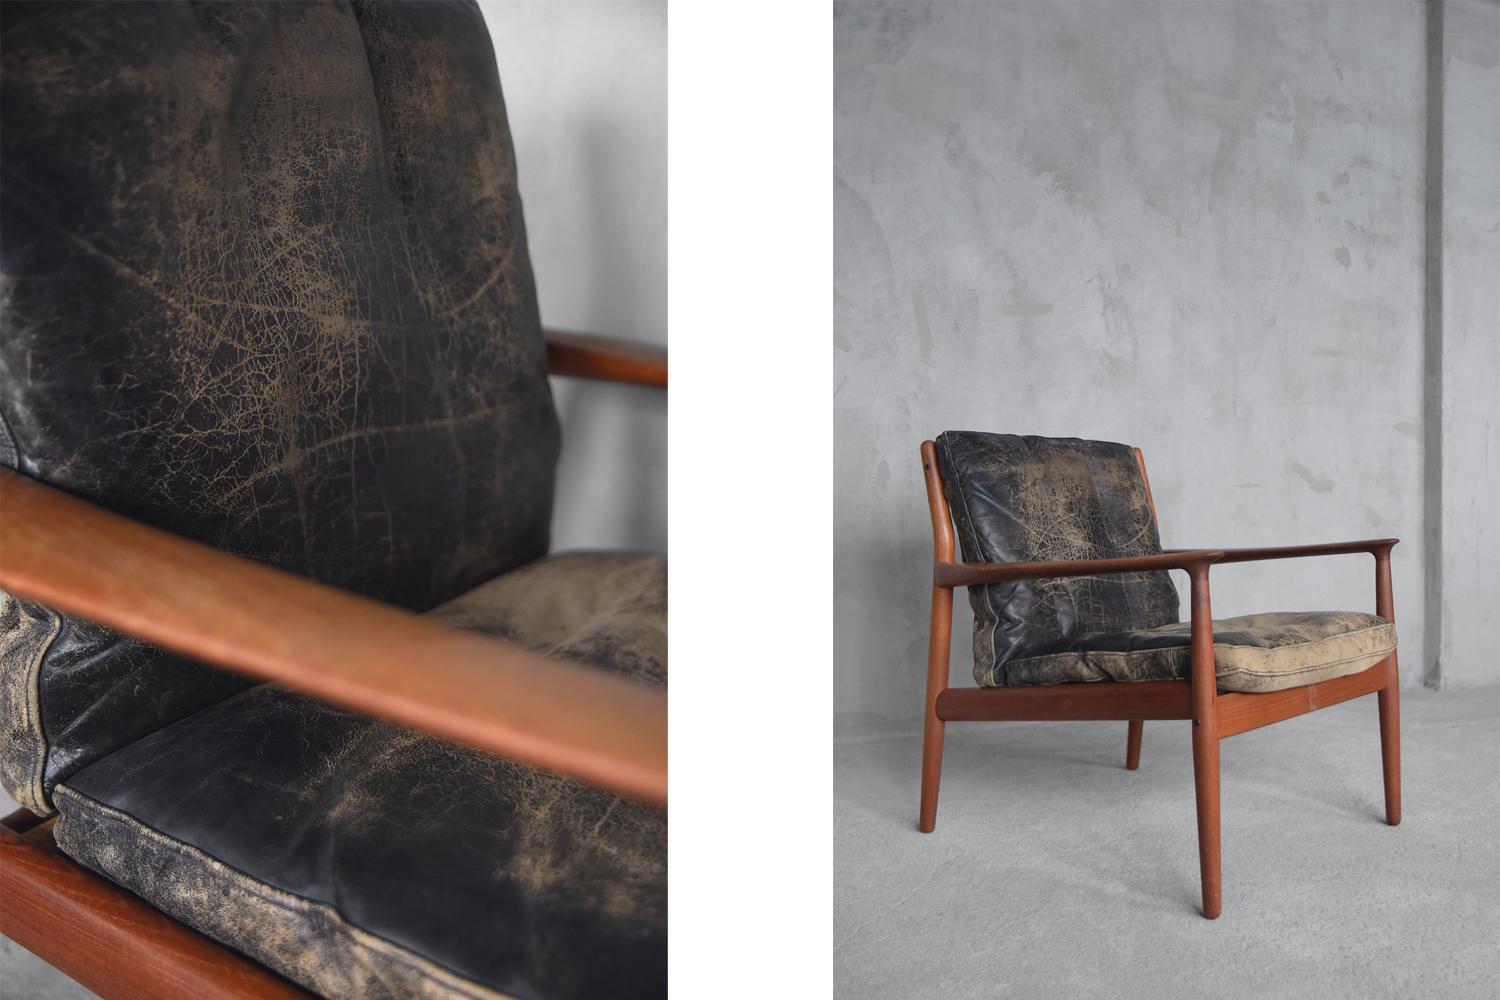 This elegant GM-5modernist armchair was designed by Svenda Åge Eriksen for the Danish manufacture Glostrup Møbelfabrik during the 1960s. This armchair comes from the first years of production. It has a solid teak frame (Bangkok Teak) and carved